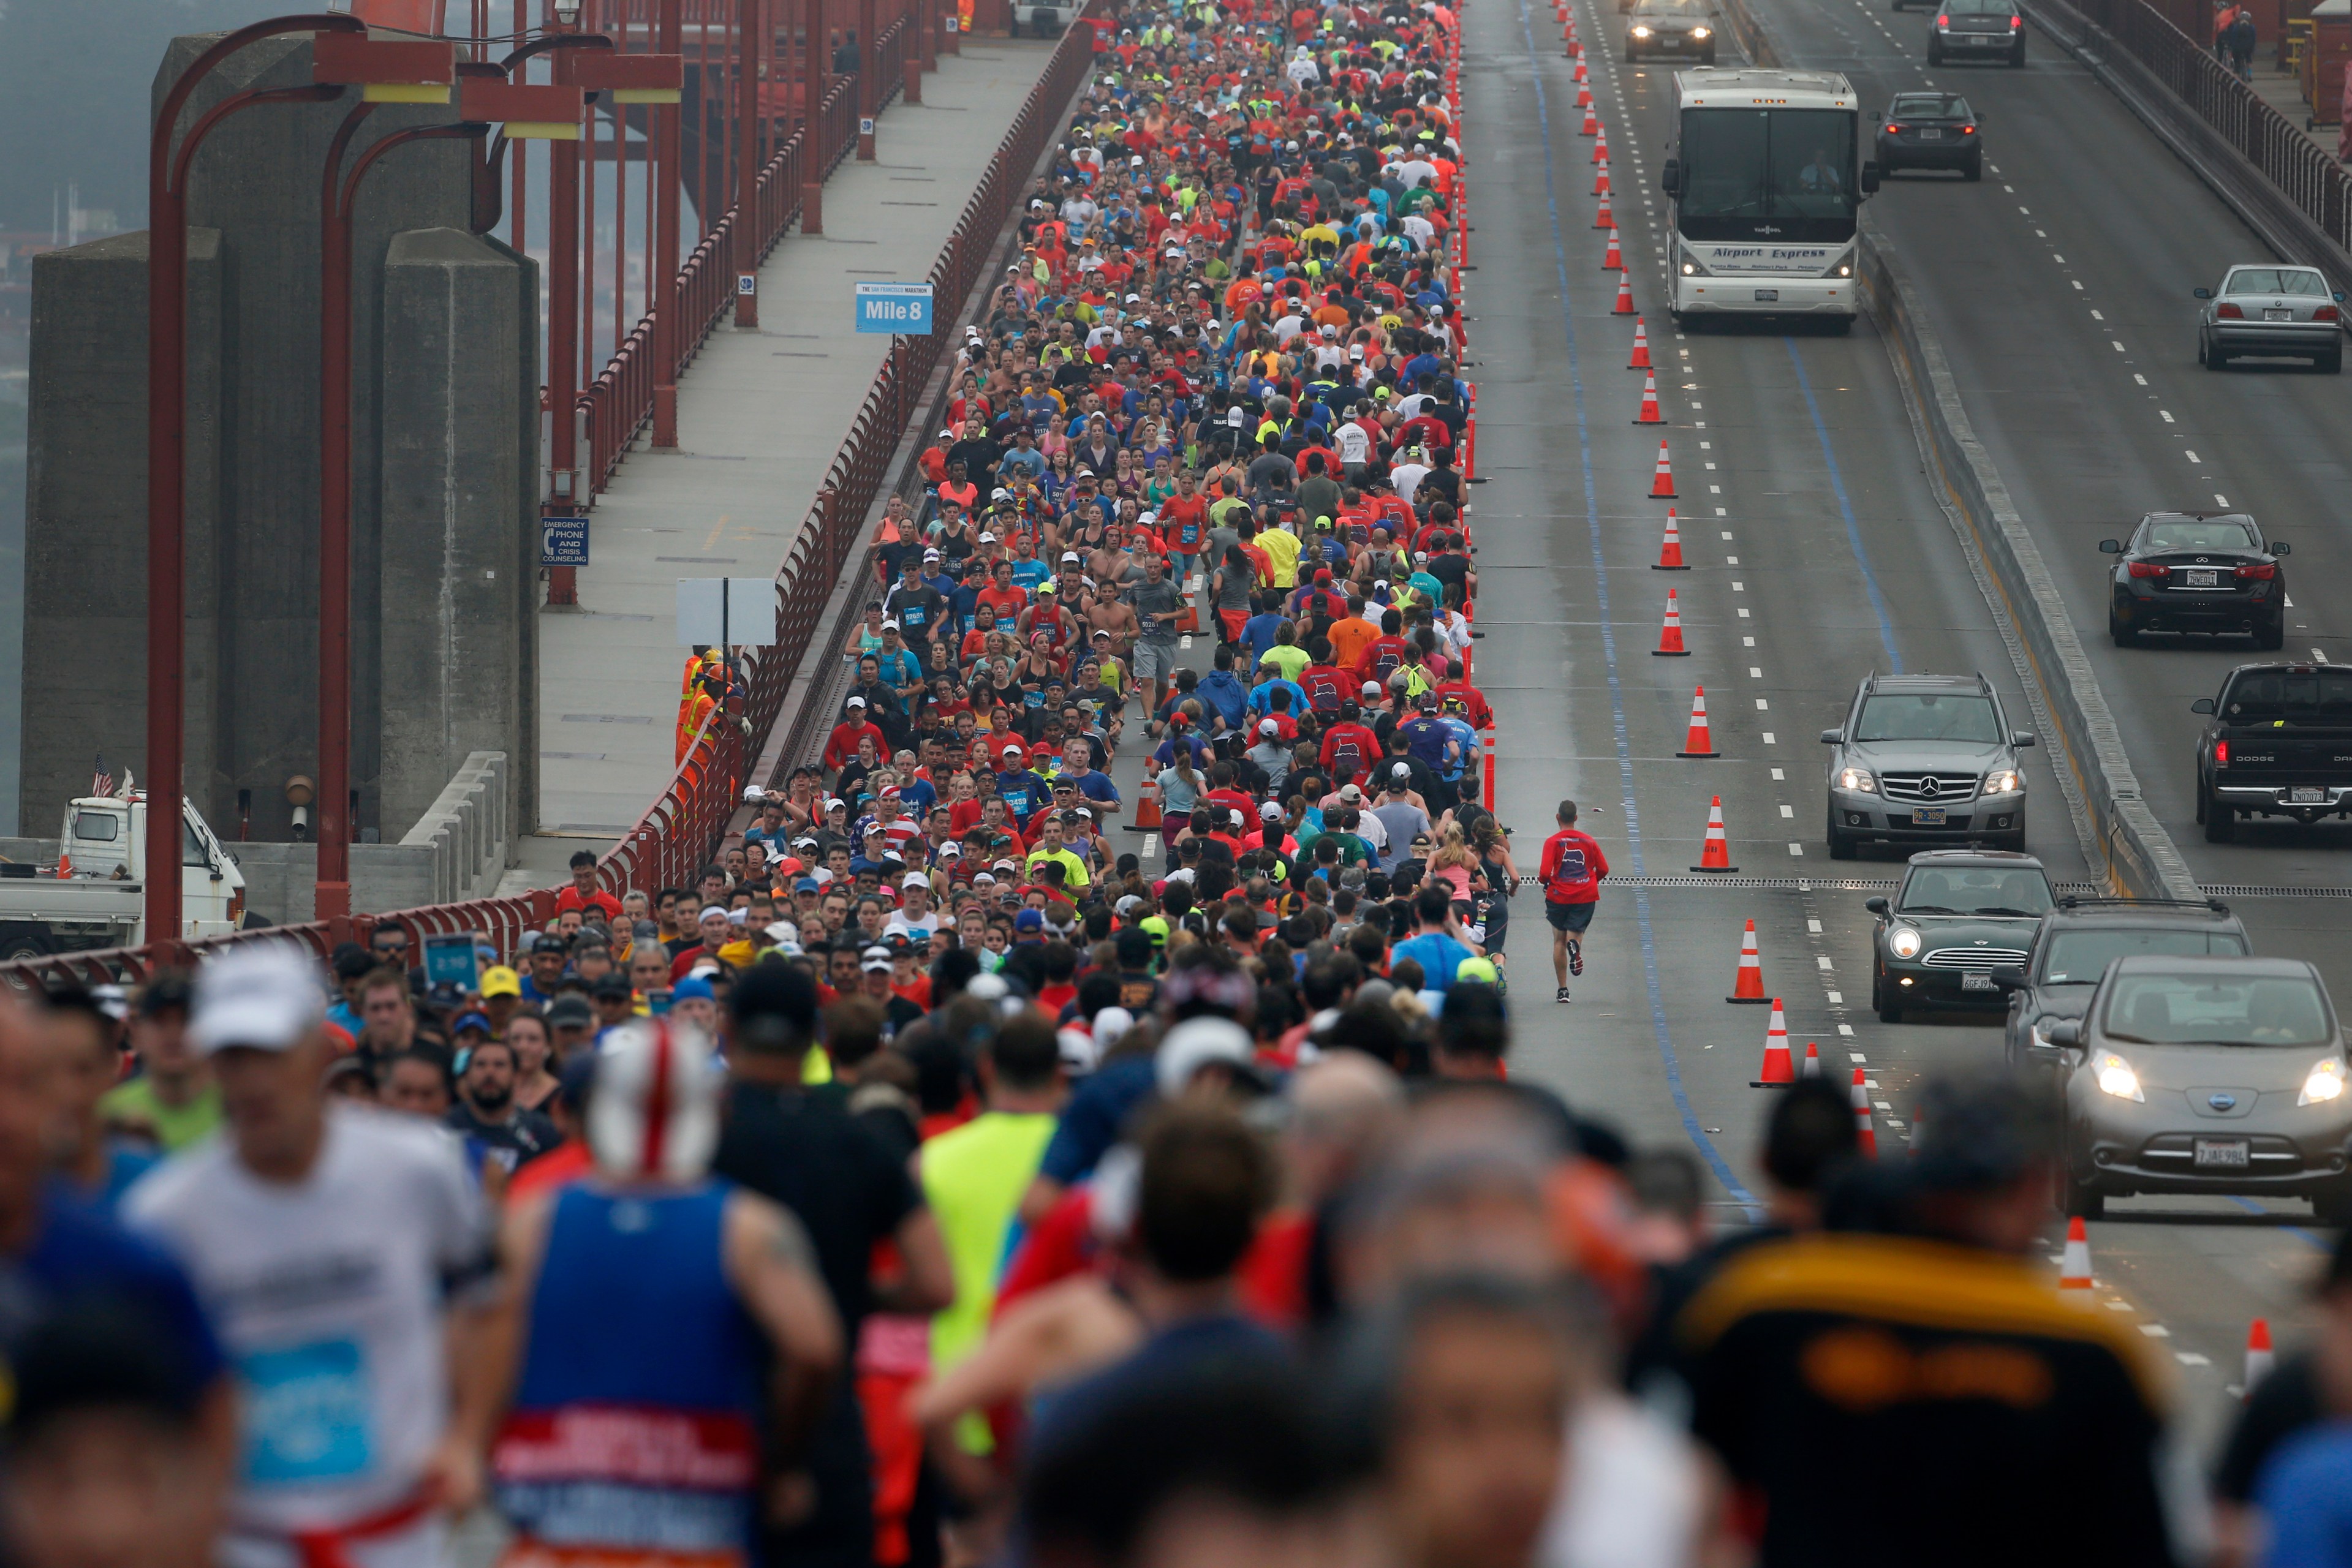 A large crowd of runners, some in brightly colored attire, participate in a race on a bridge. Traffic is separated from the runners by cones on the right.